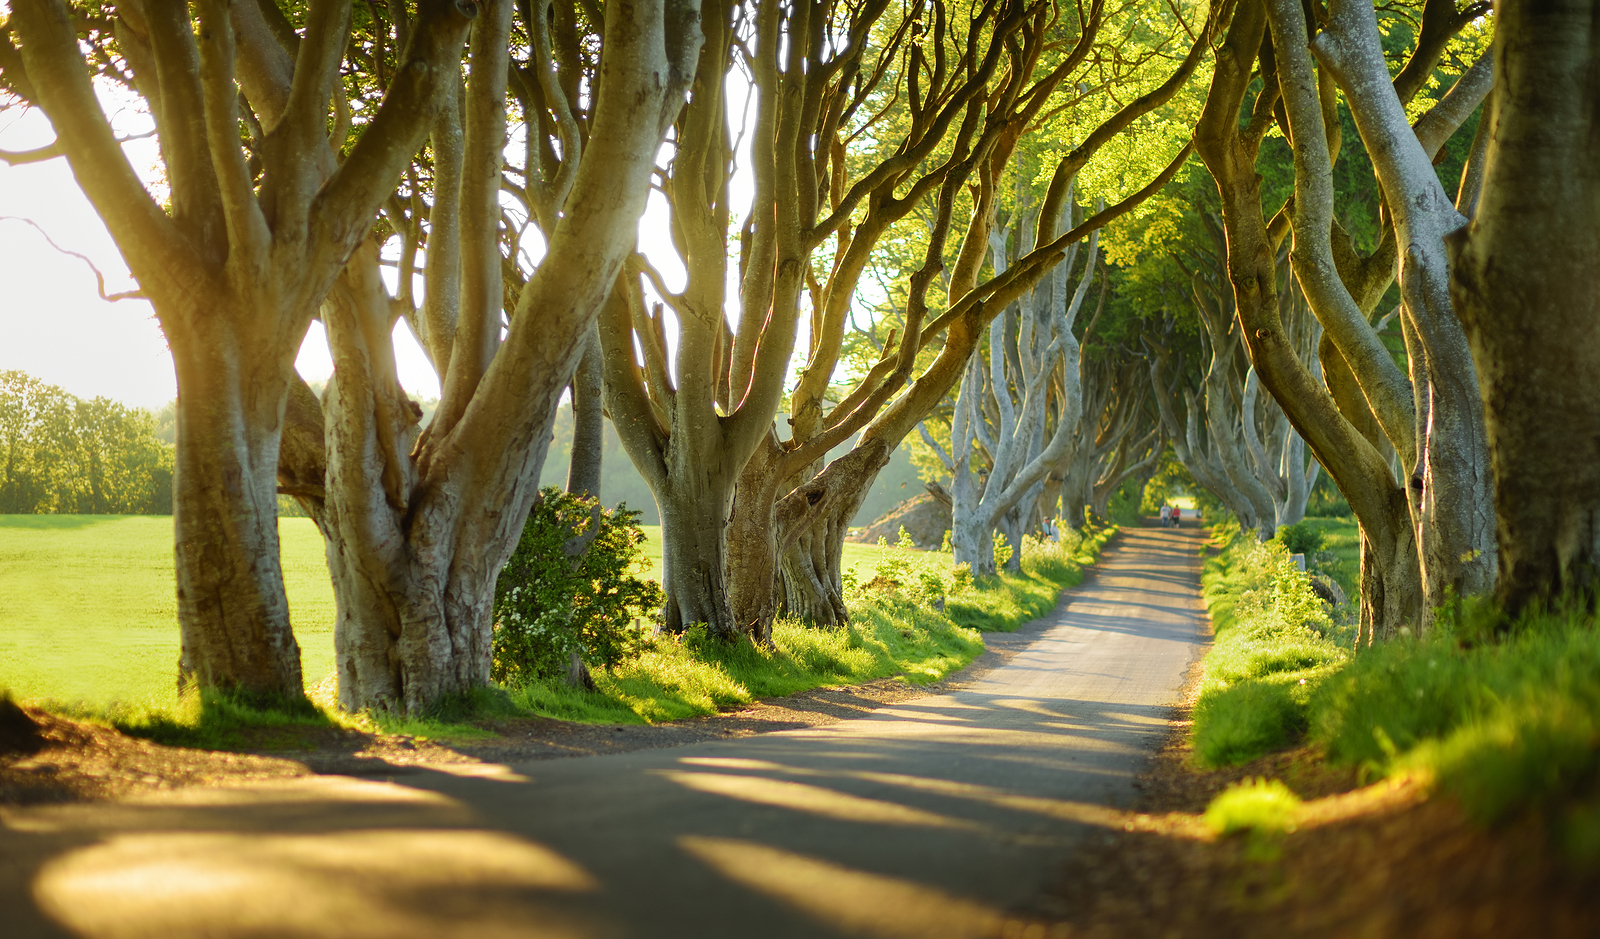 The Dark Hedges, An Avenue Of Beech Trees Along Bregagh Road In